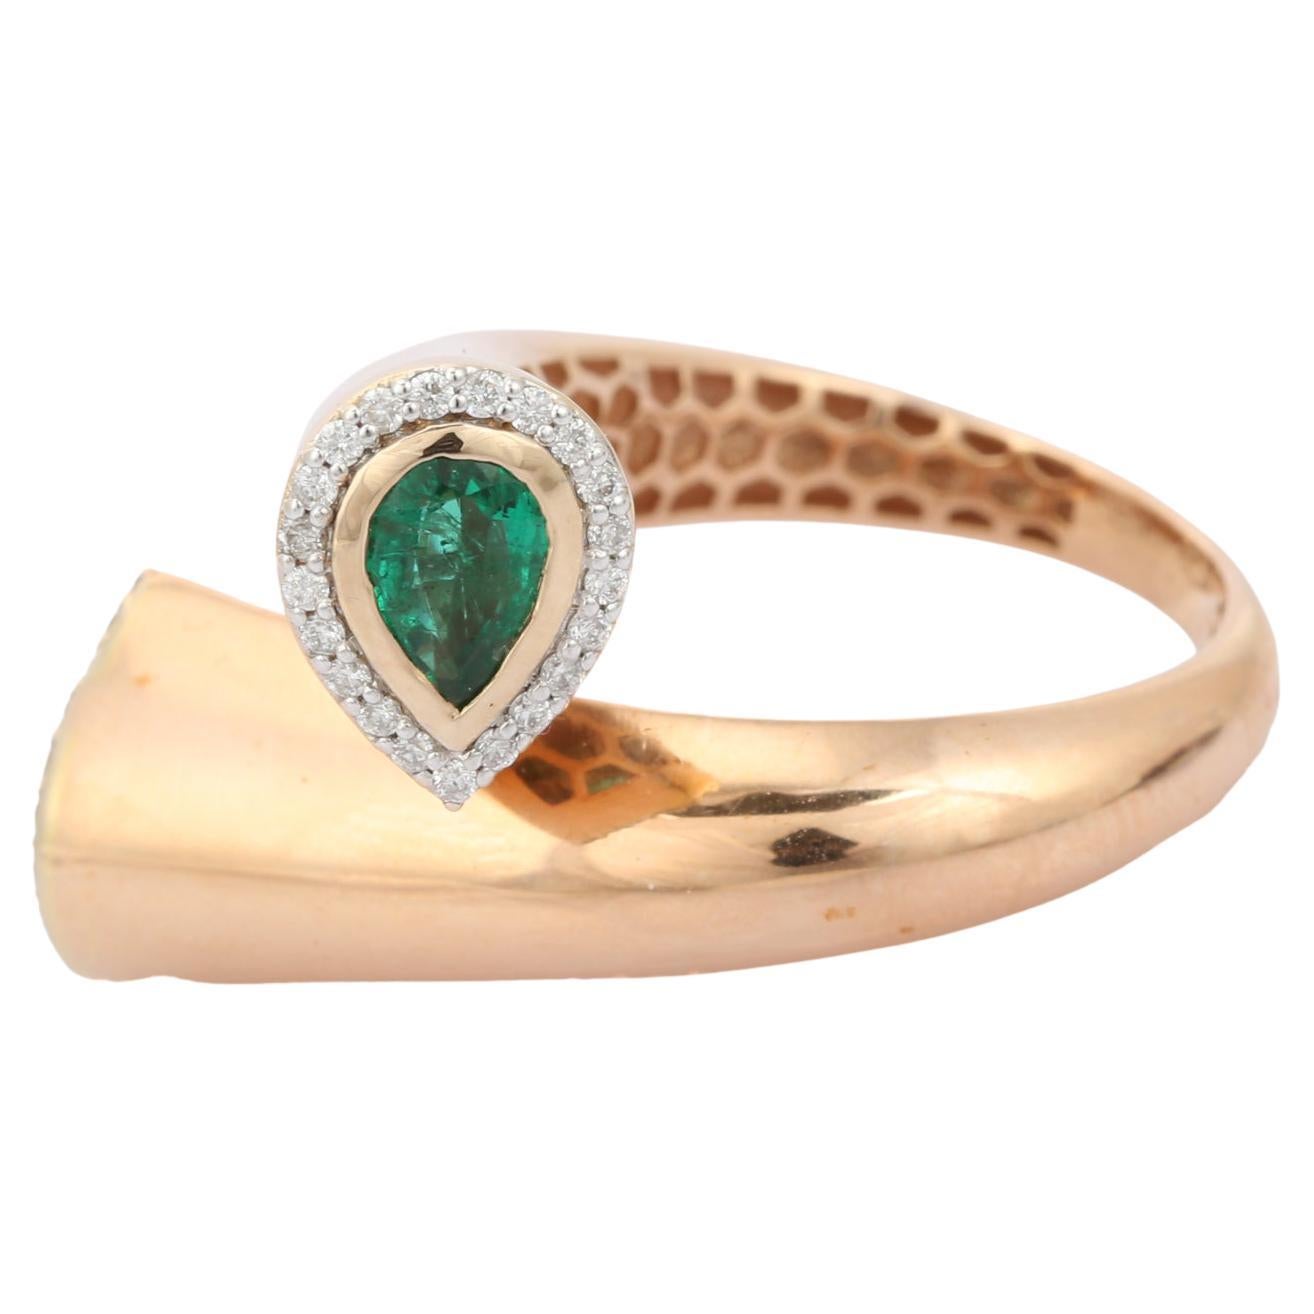 For Sale:  Unique 18k Solid Yellow Gold Emerald and Diamond Bypass Ring